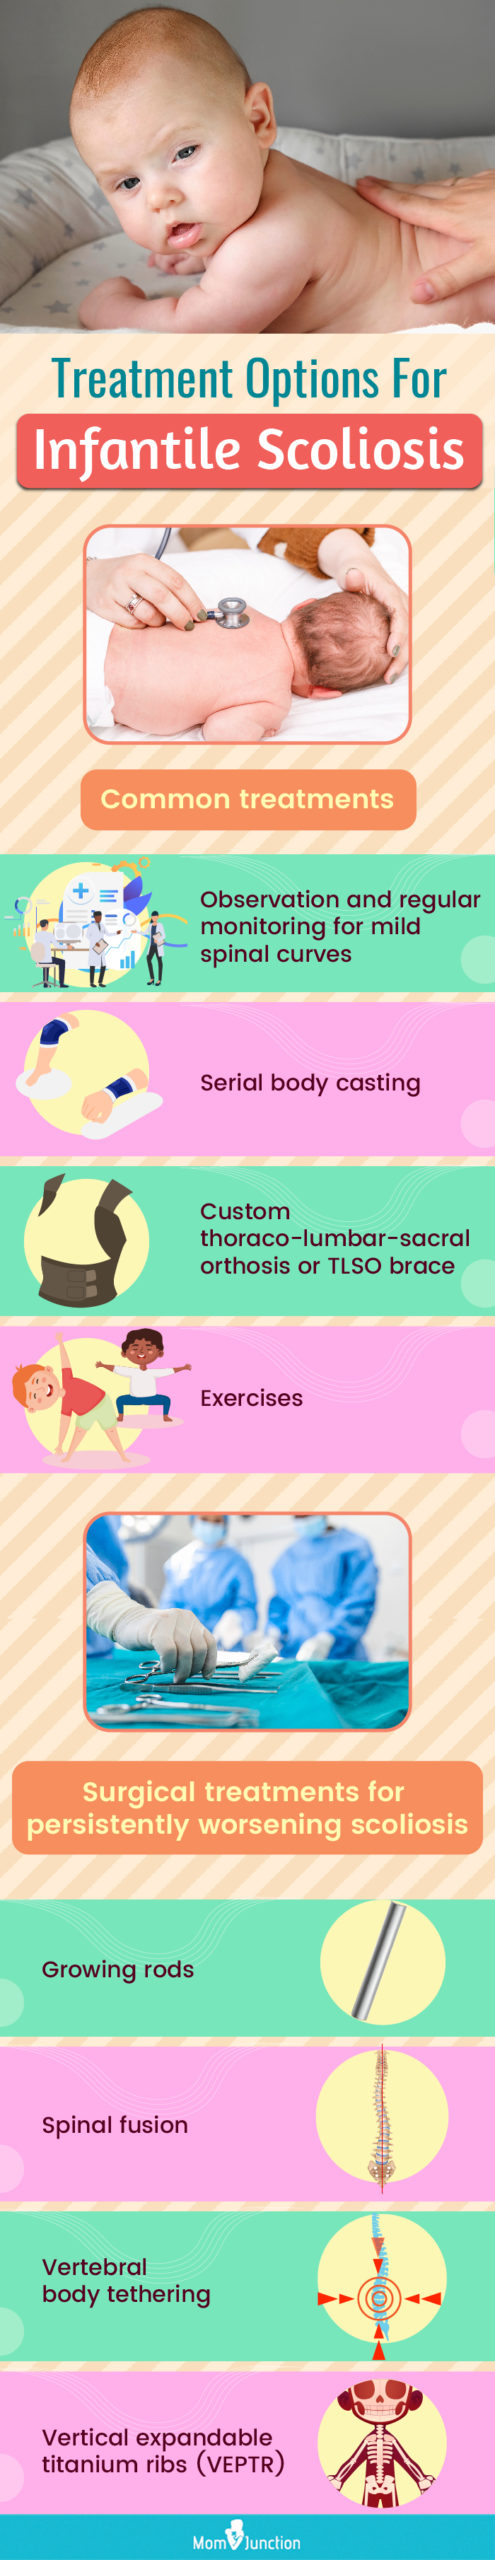 treatment options for infantile scoliosis (infographic)